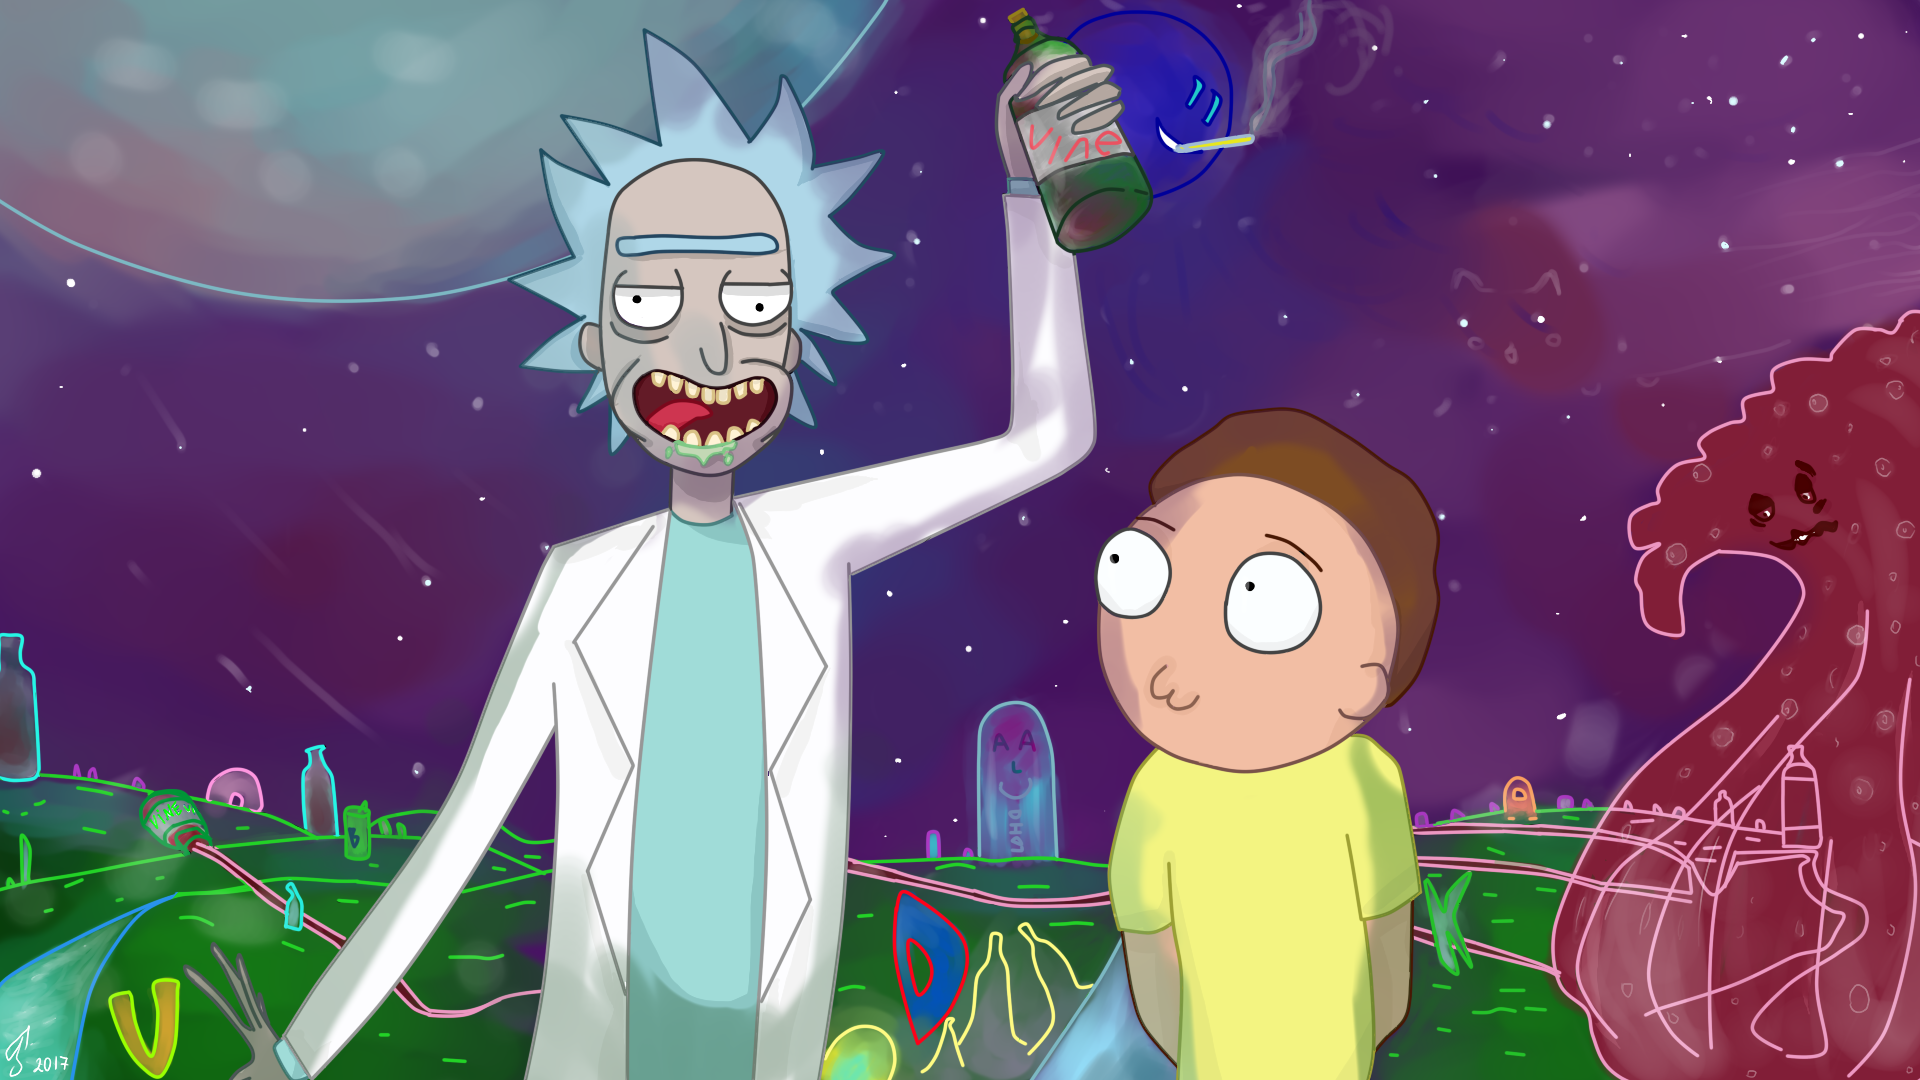 Rick and Morty in the universe of alcohol by AliceDevolskaya on DeviantArt.